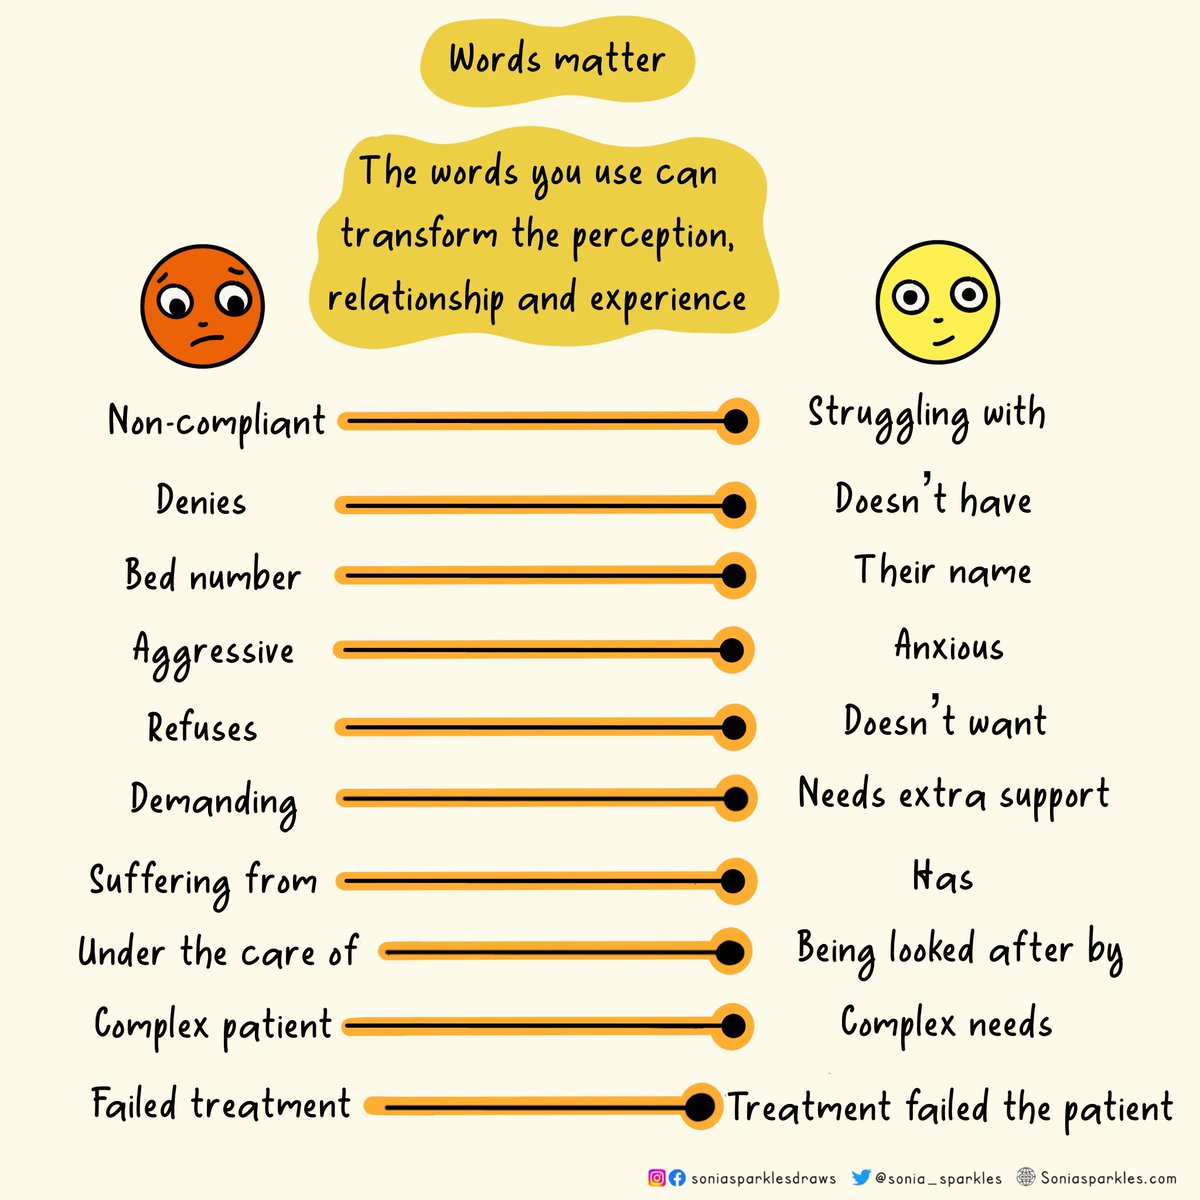 Words are a powerful thing that can shape views, perceptions, beliefs & expectations. How we talk about patients can dehumanise them & impact how we see them. Think about your words #PatientCare